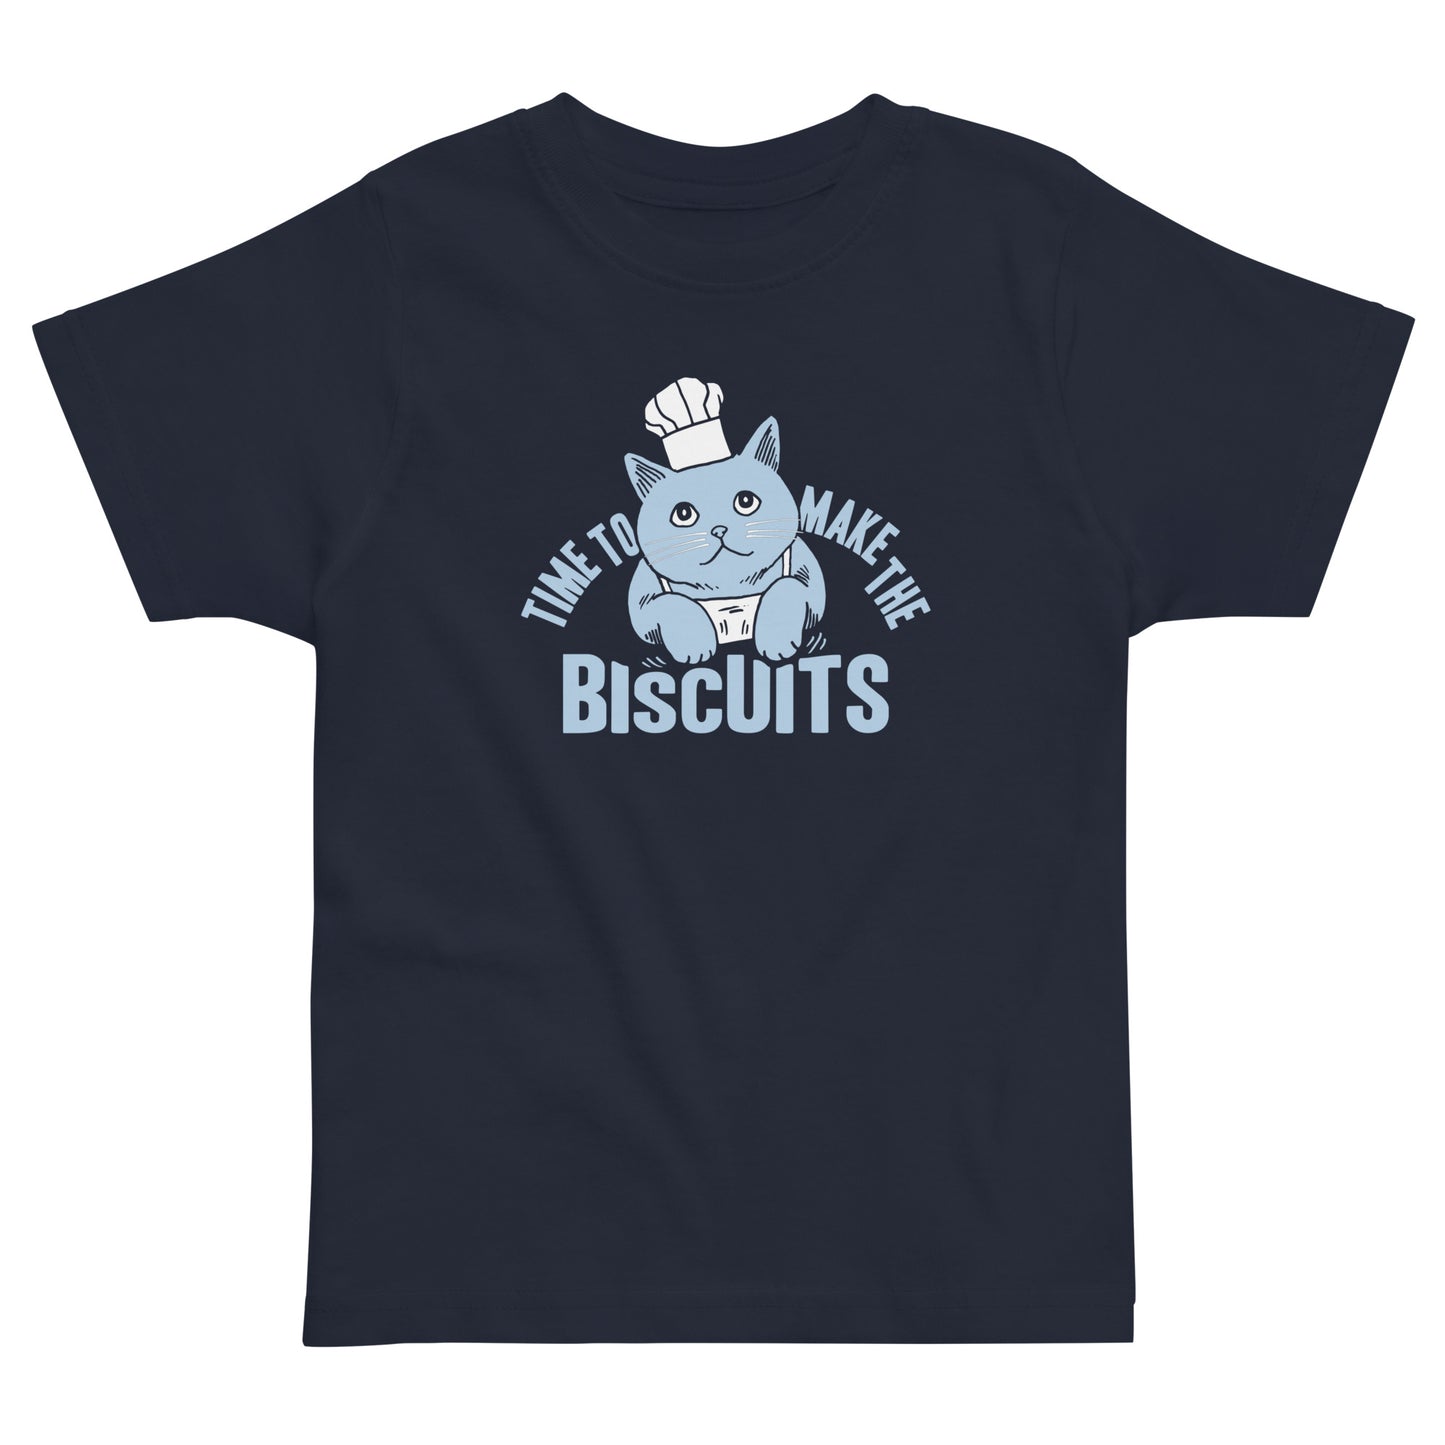 Time To Make The Biscuits Kid's Toddler Tee